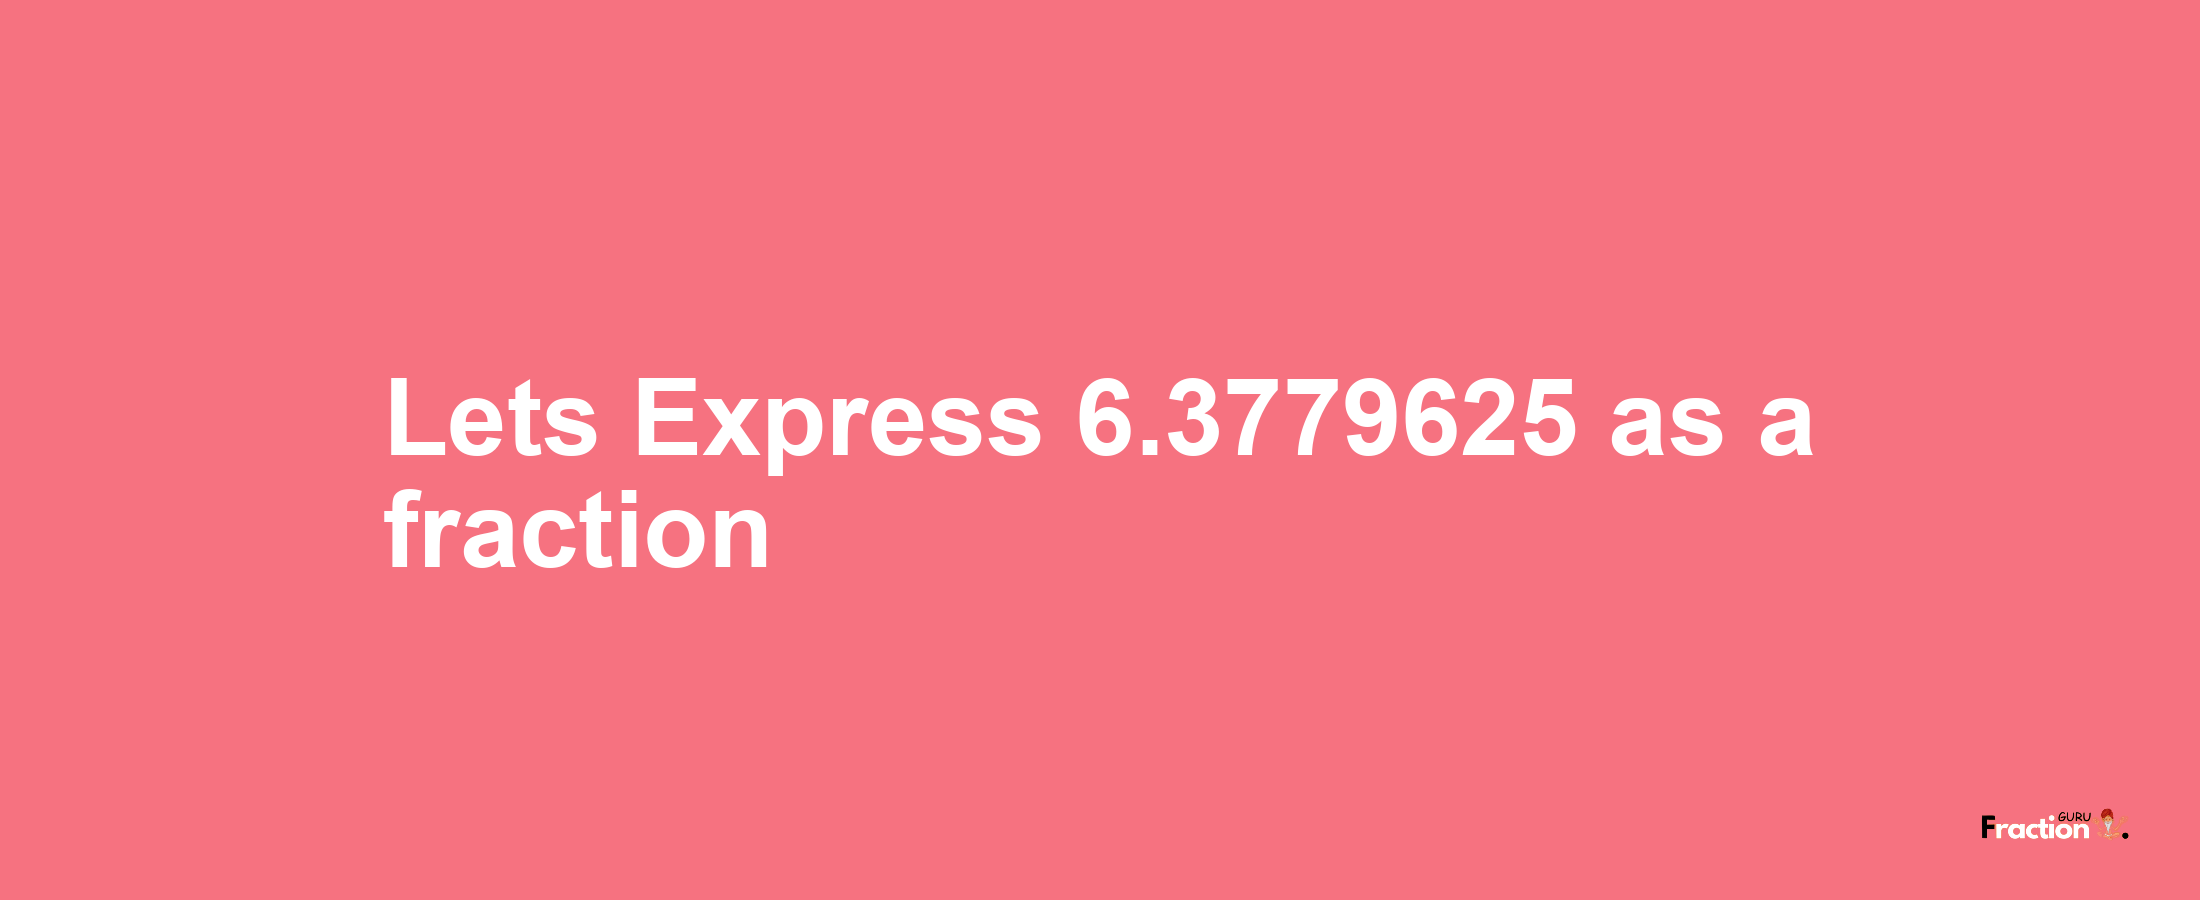 Lets Express 6.3779625 as afraction